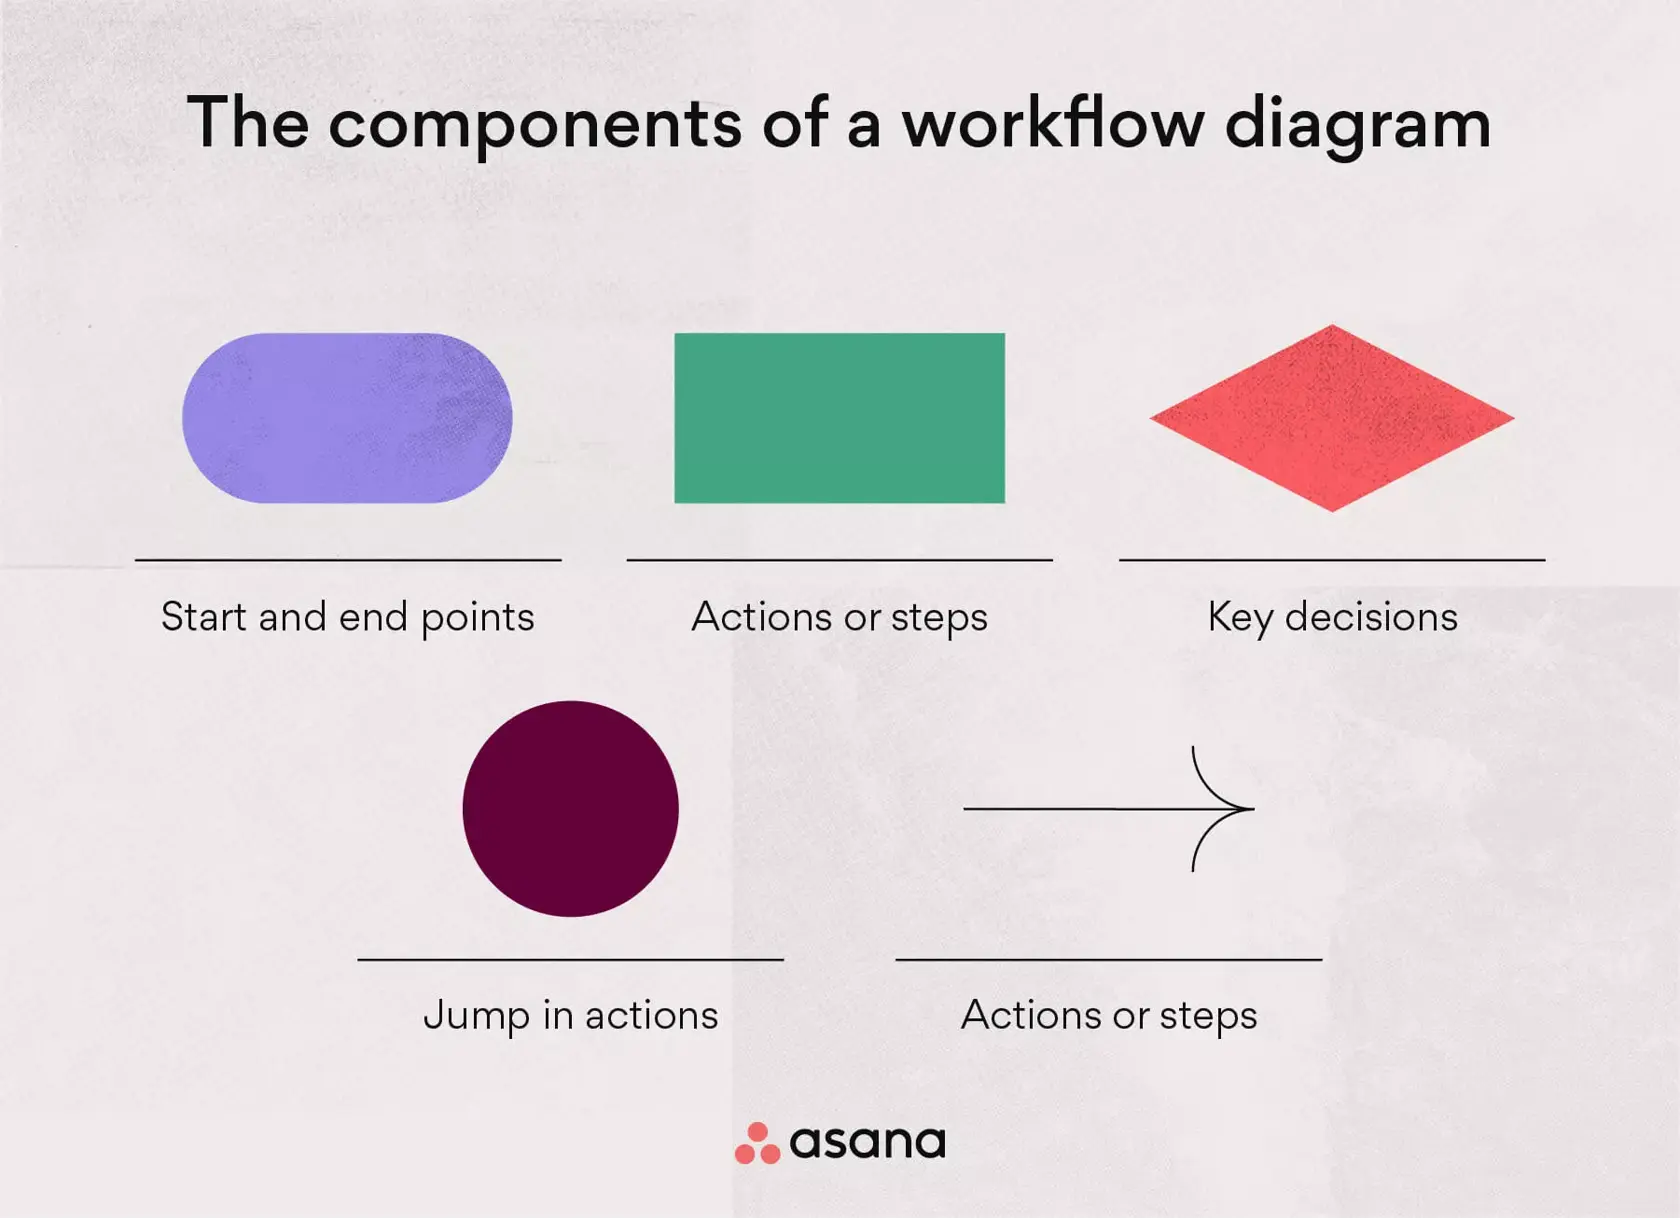 The components of a workflow diagram